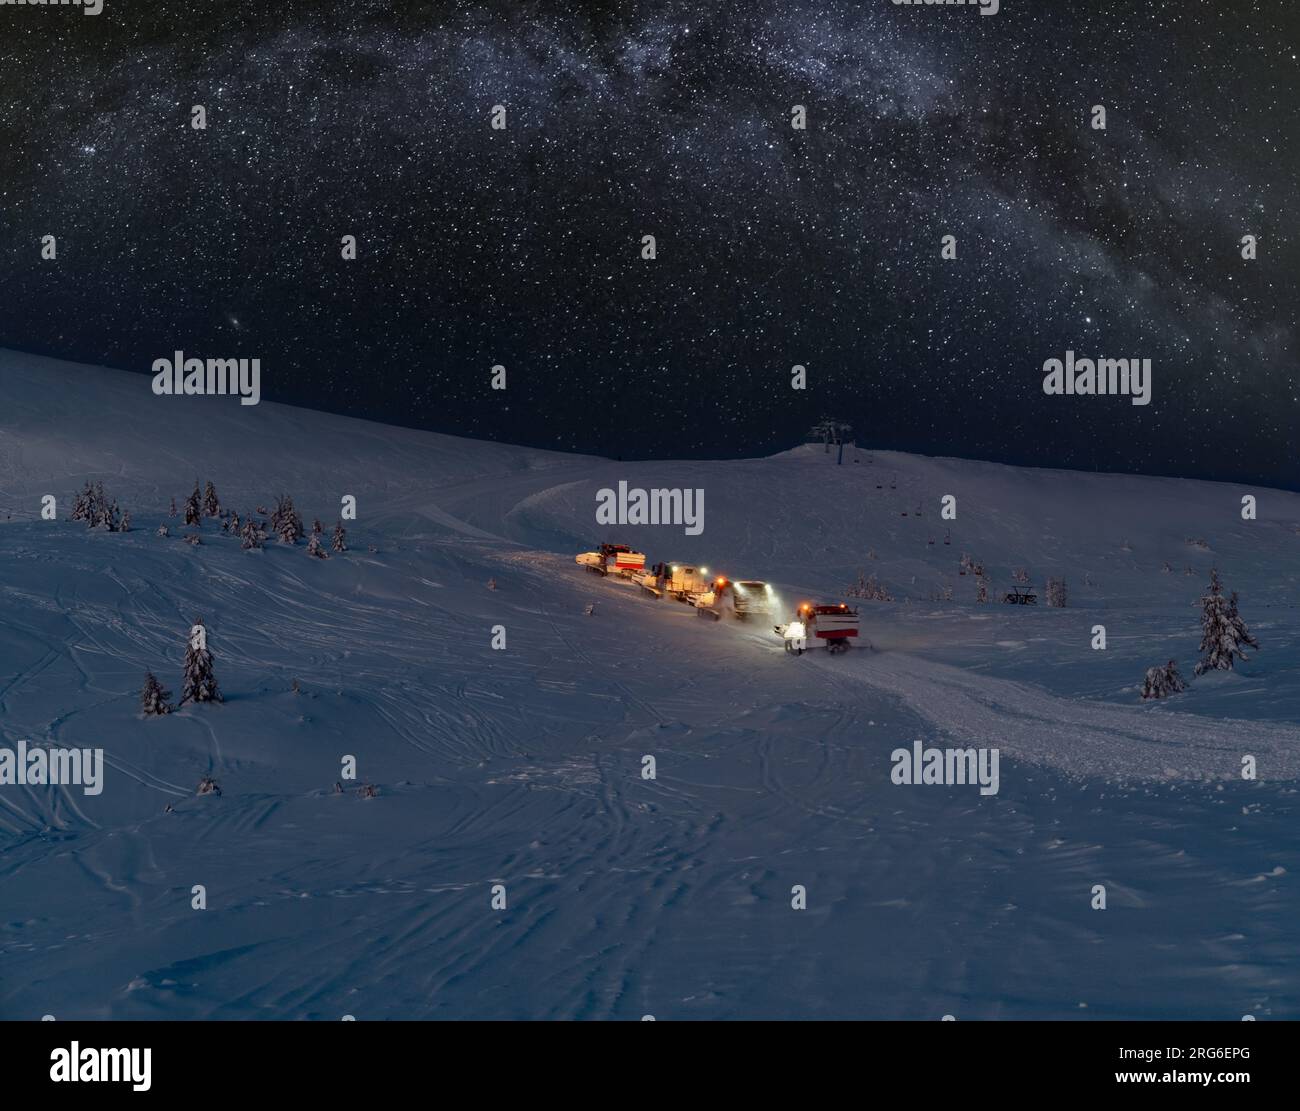 Snow groomers (snowcat ratrack machines) on night  excursion ride to winter mountain top with freeriders snowboarders and starry sky with Milkyway abo Stock Photo